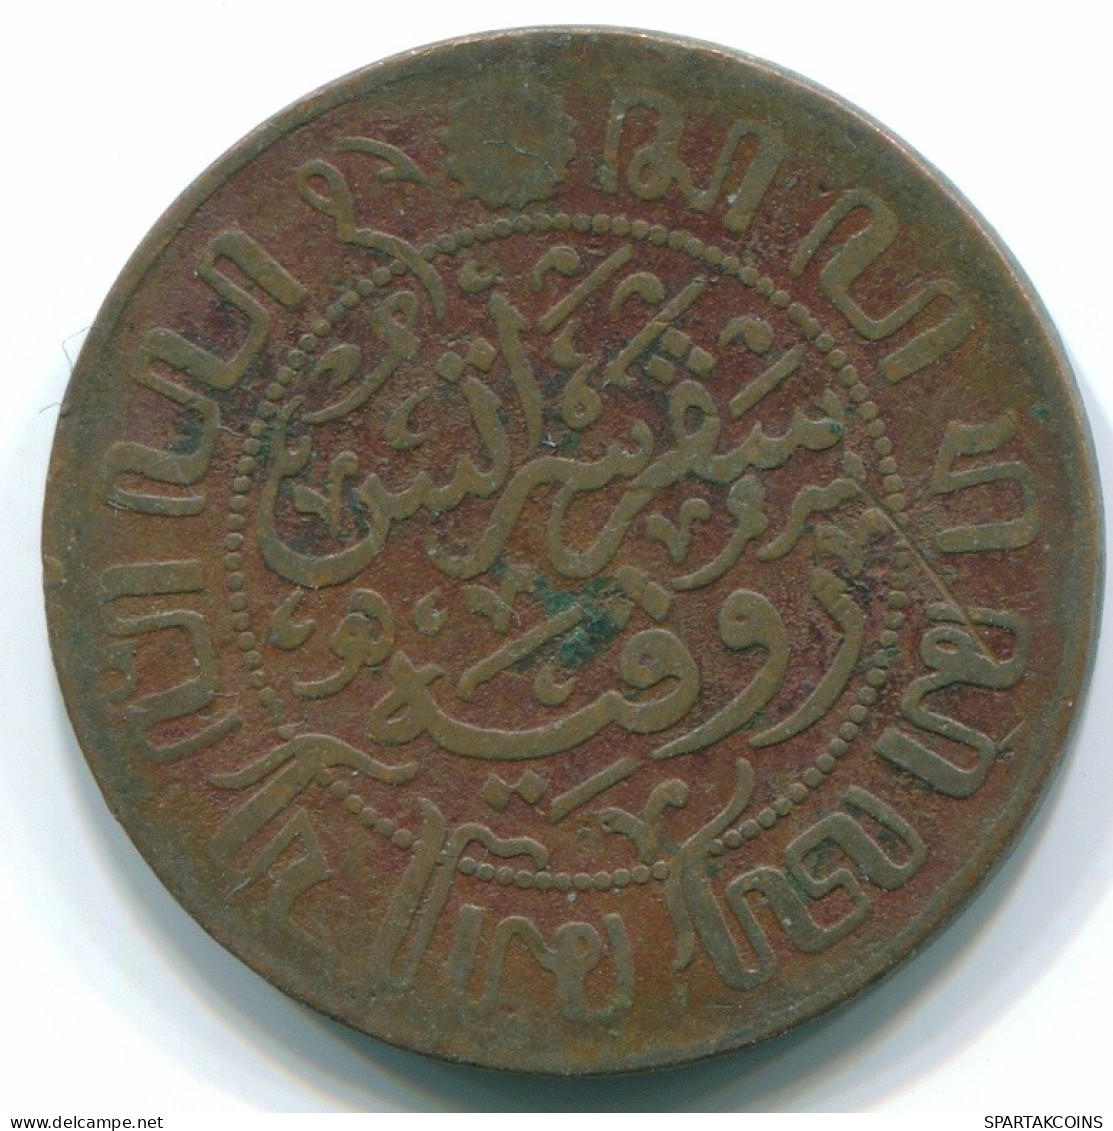 1 CENT 1920 NETHERLANDS EAST INDIES INDONESIA Copper Colonial Coin #S10089.U.A - Indes Néerlandaises